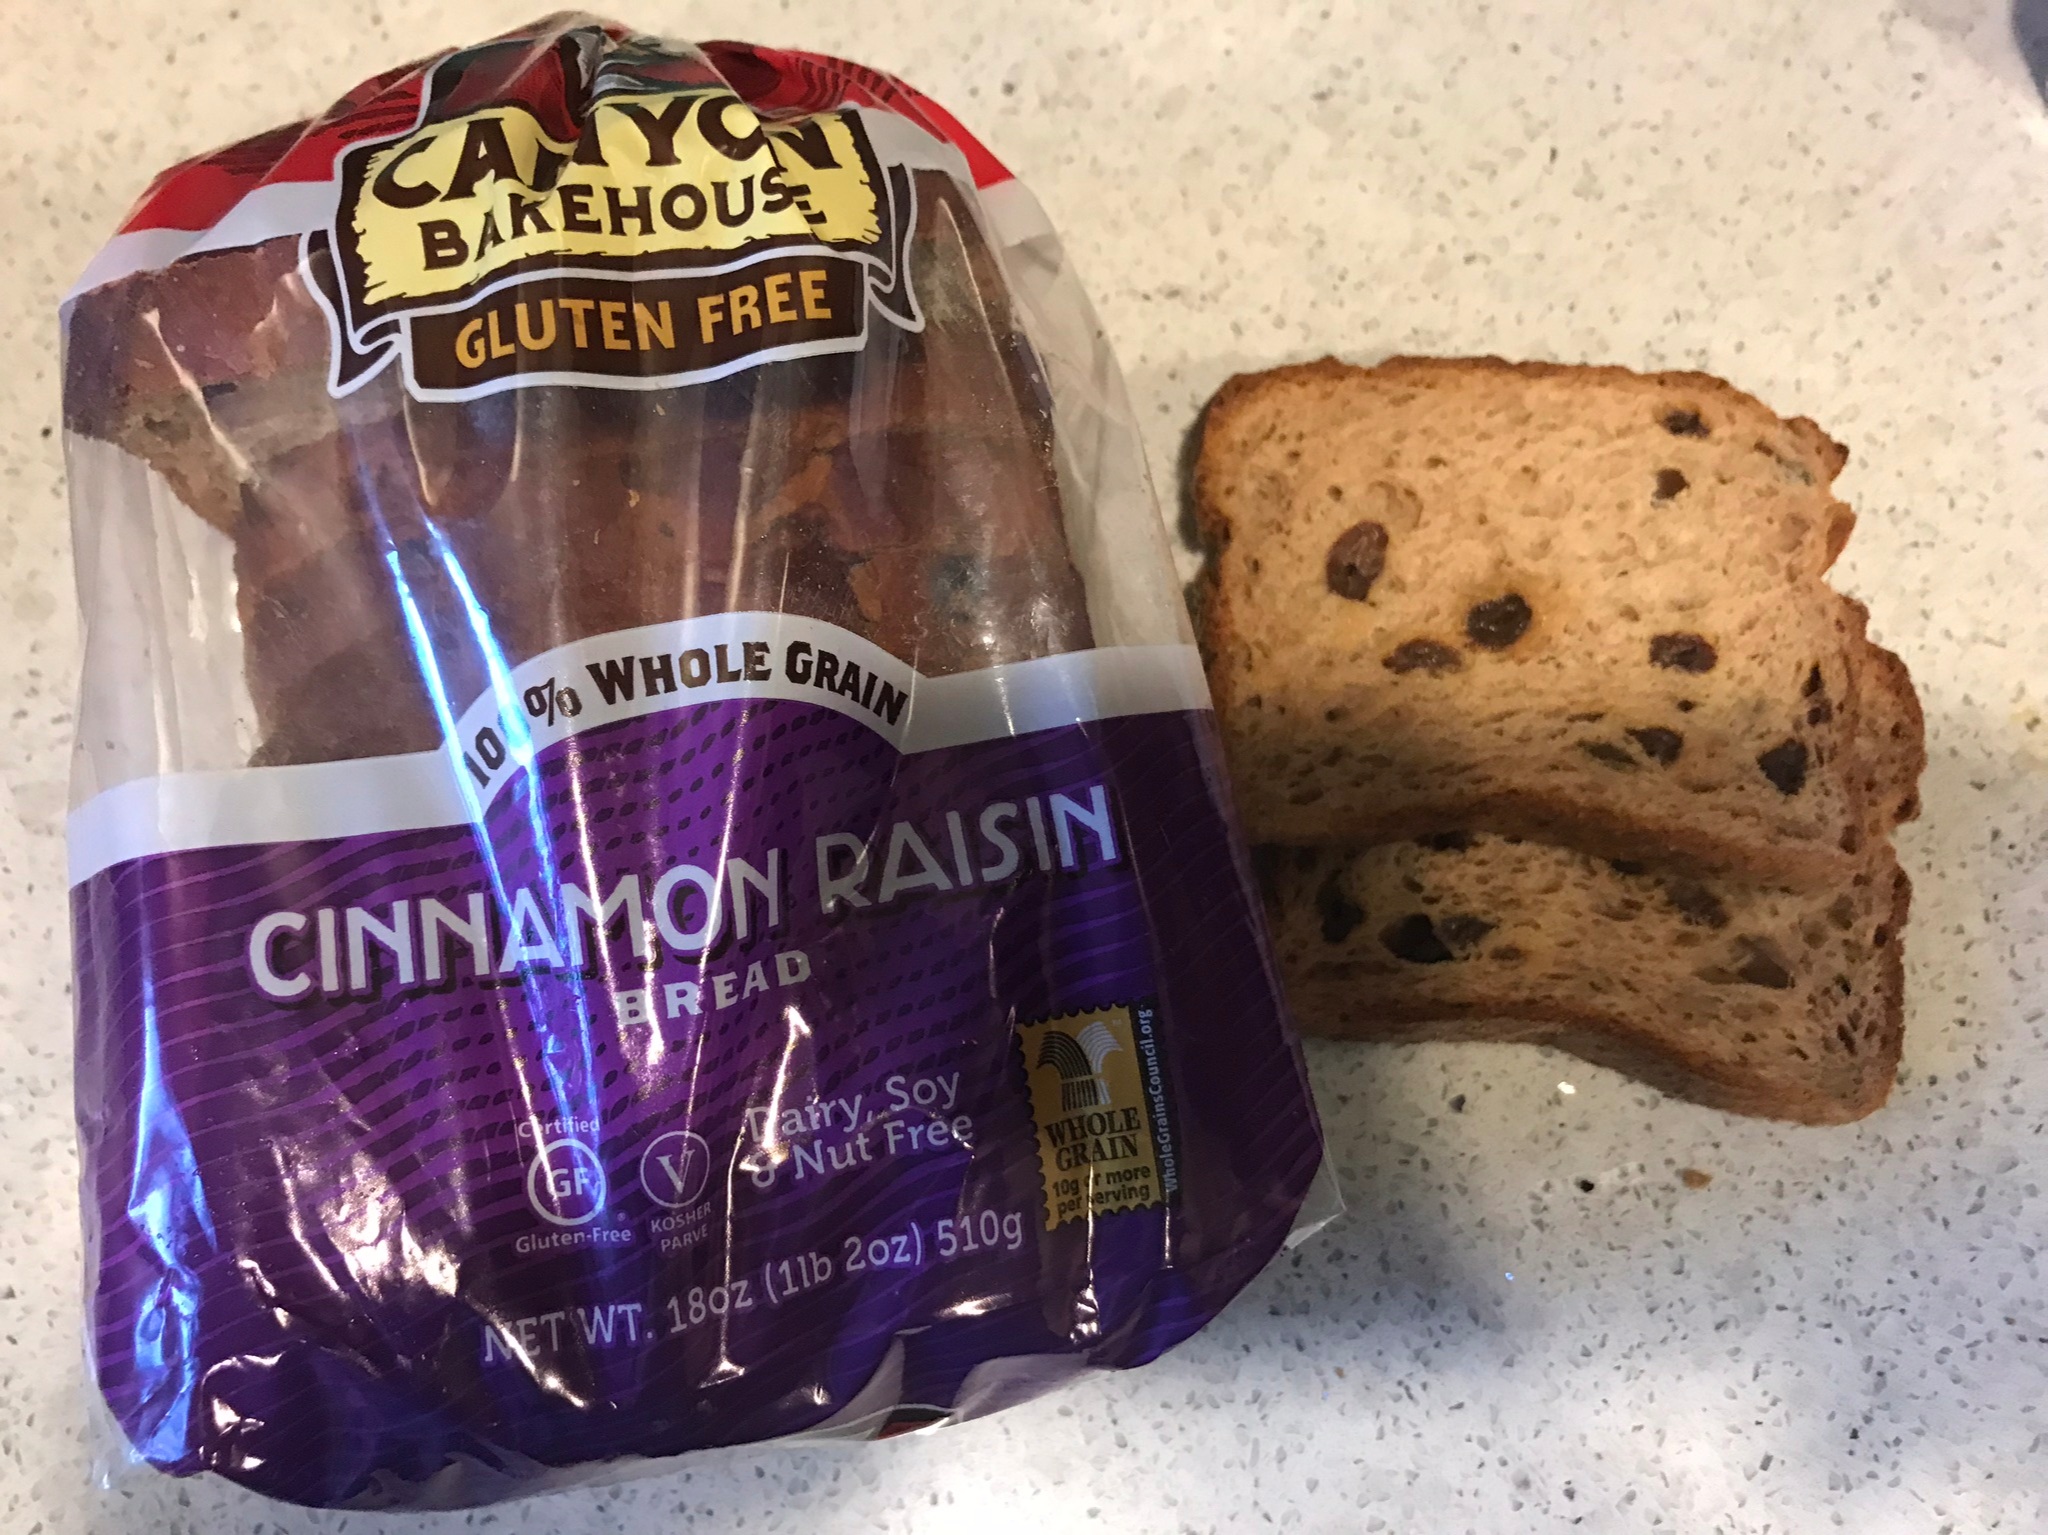 Canyon Bakehouse Gluten Free — Simple Side of Life